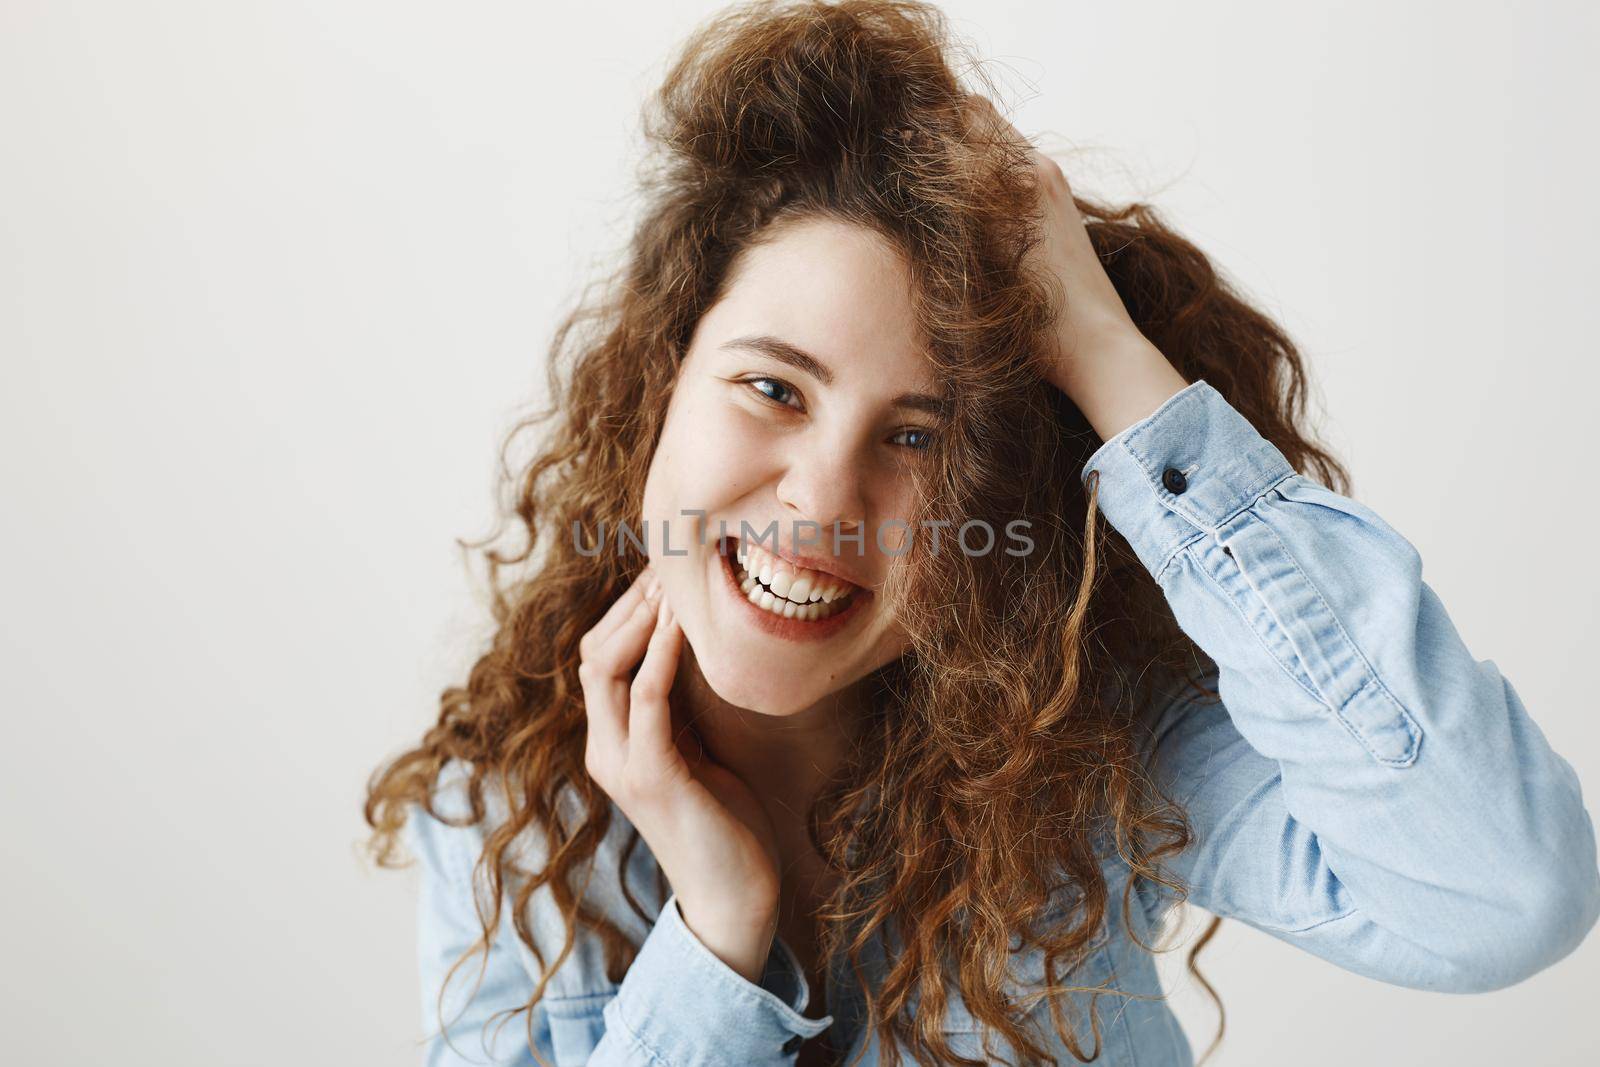 Portrait beautiful woman face close up portrait young curly hair studio on gray.